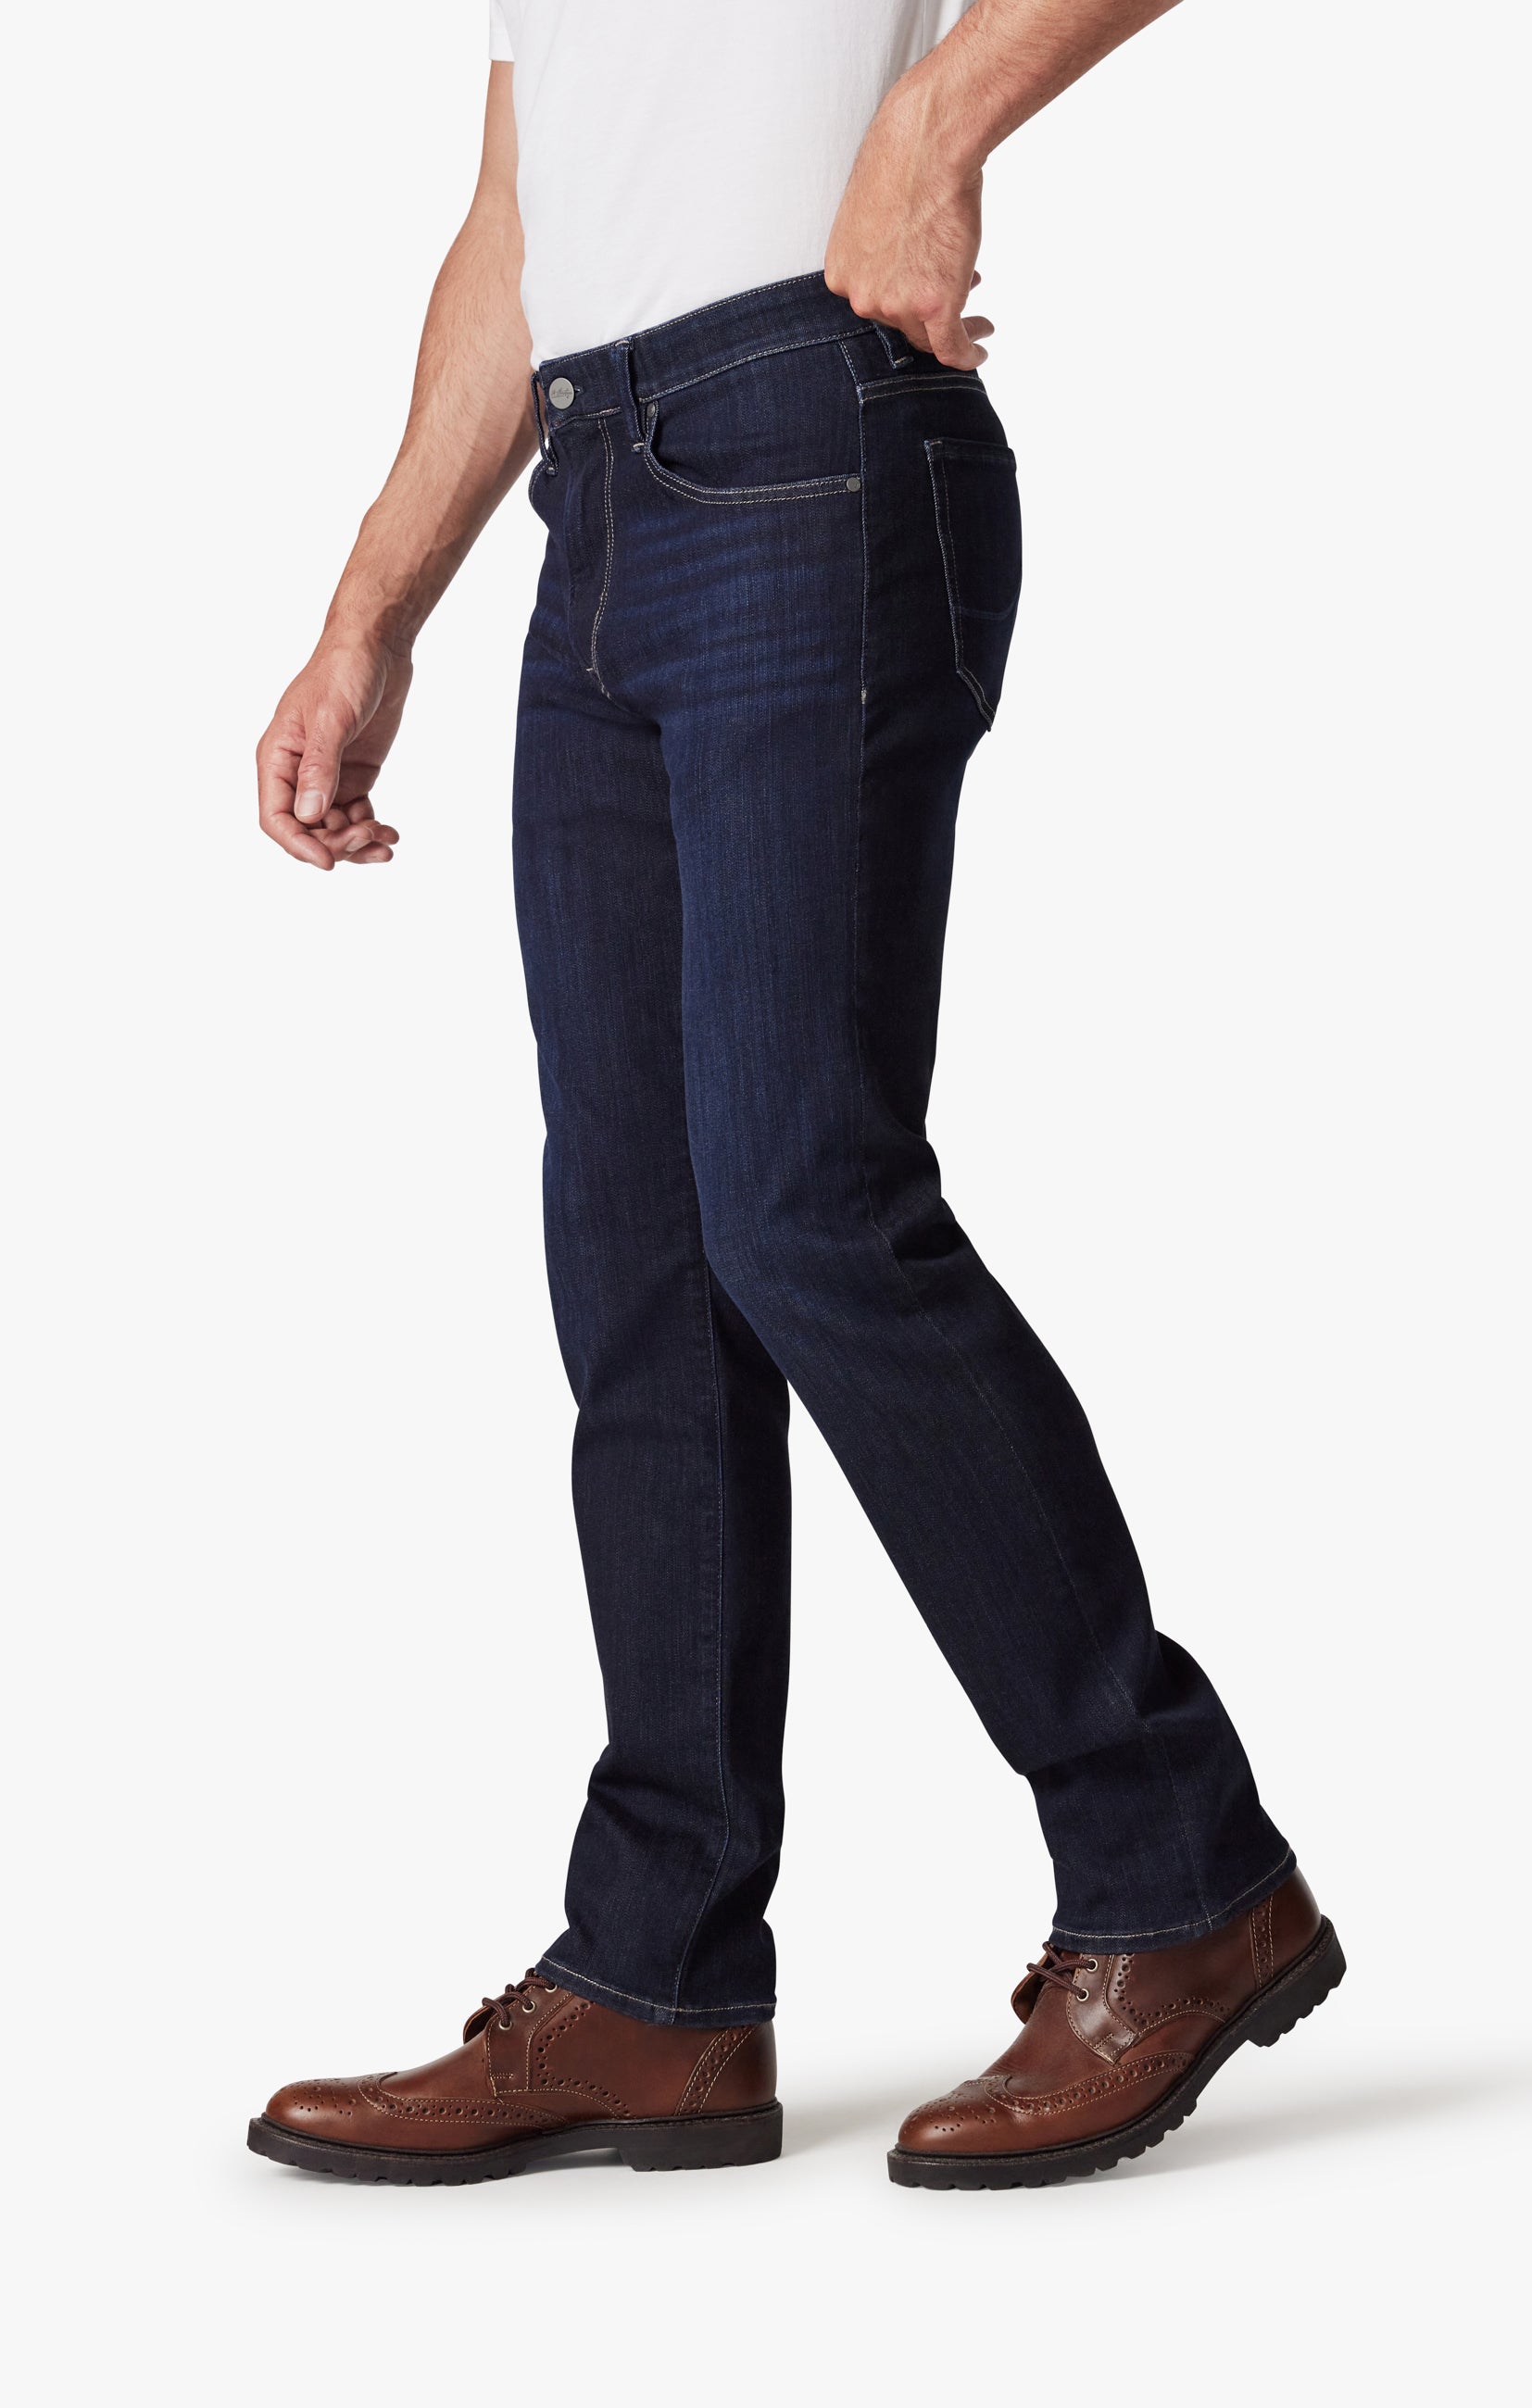 34 Heritage Men's Champ Athletic Fit Jeans in Deep Refined – 34 Heritage  Canada